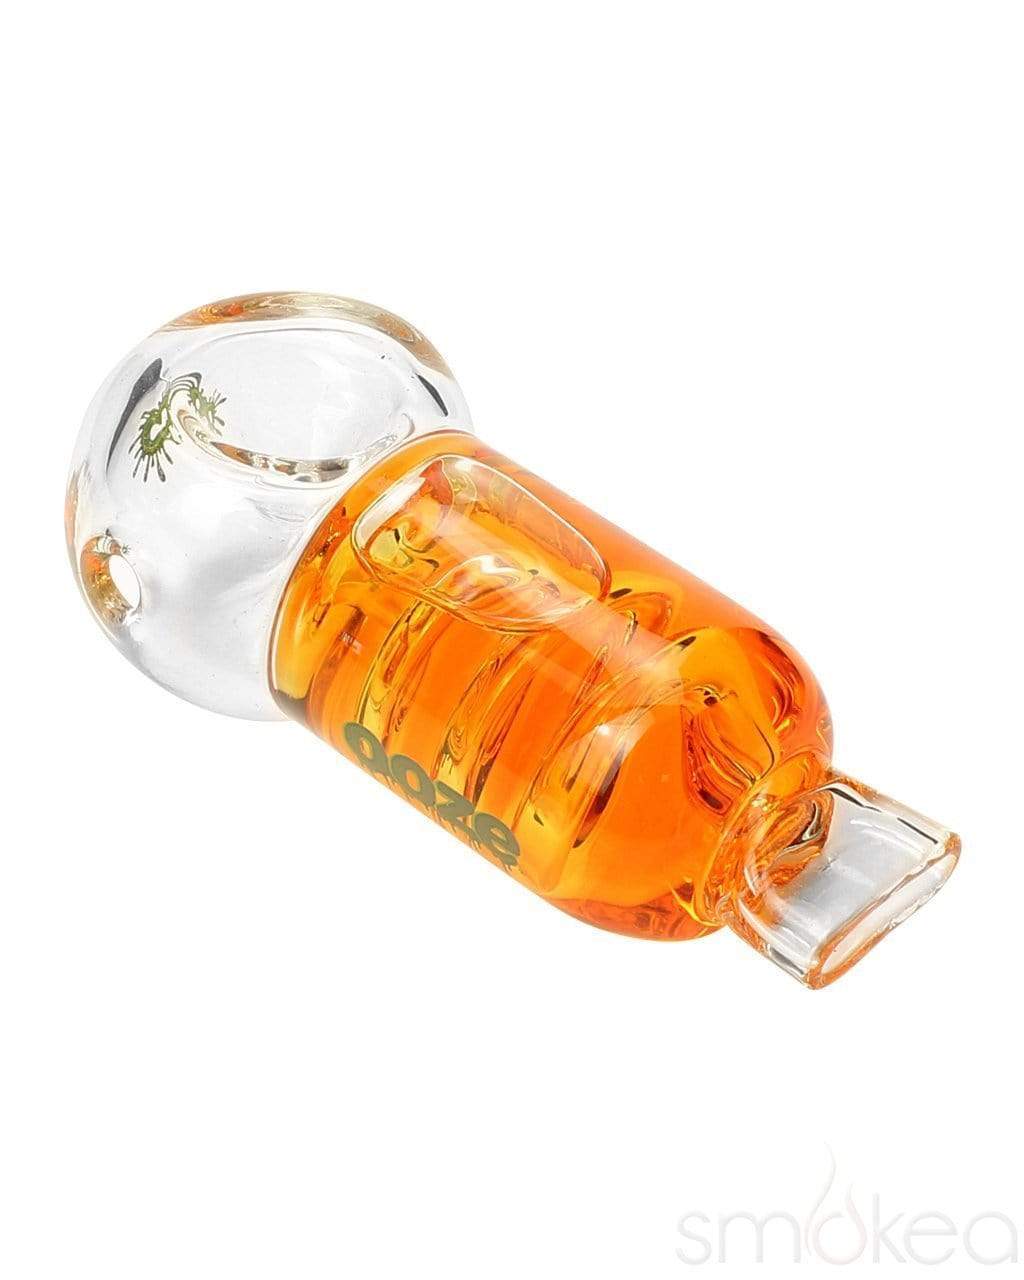 Ooze "Cryo" Glycerin Coil Hand Pipe